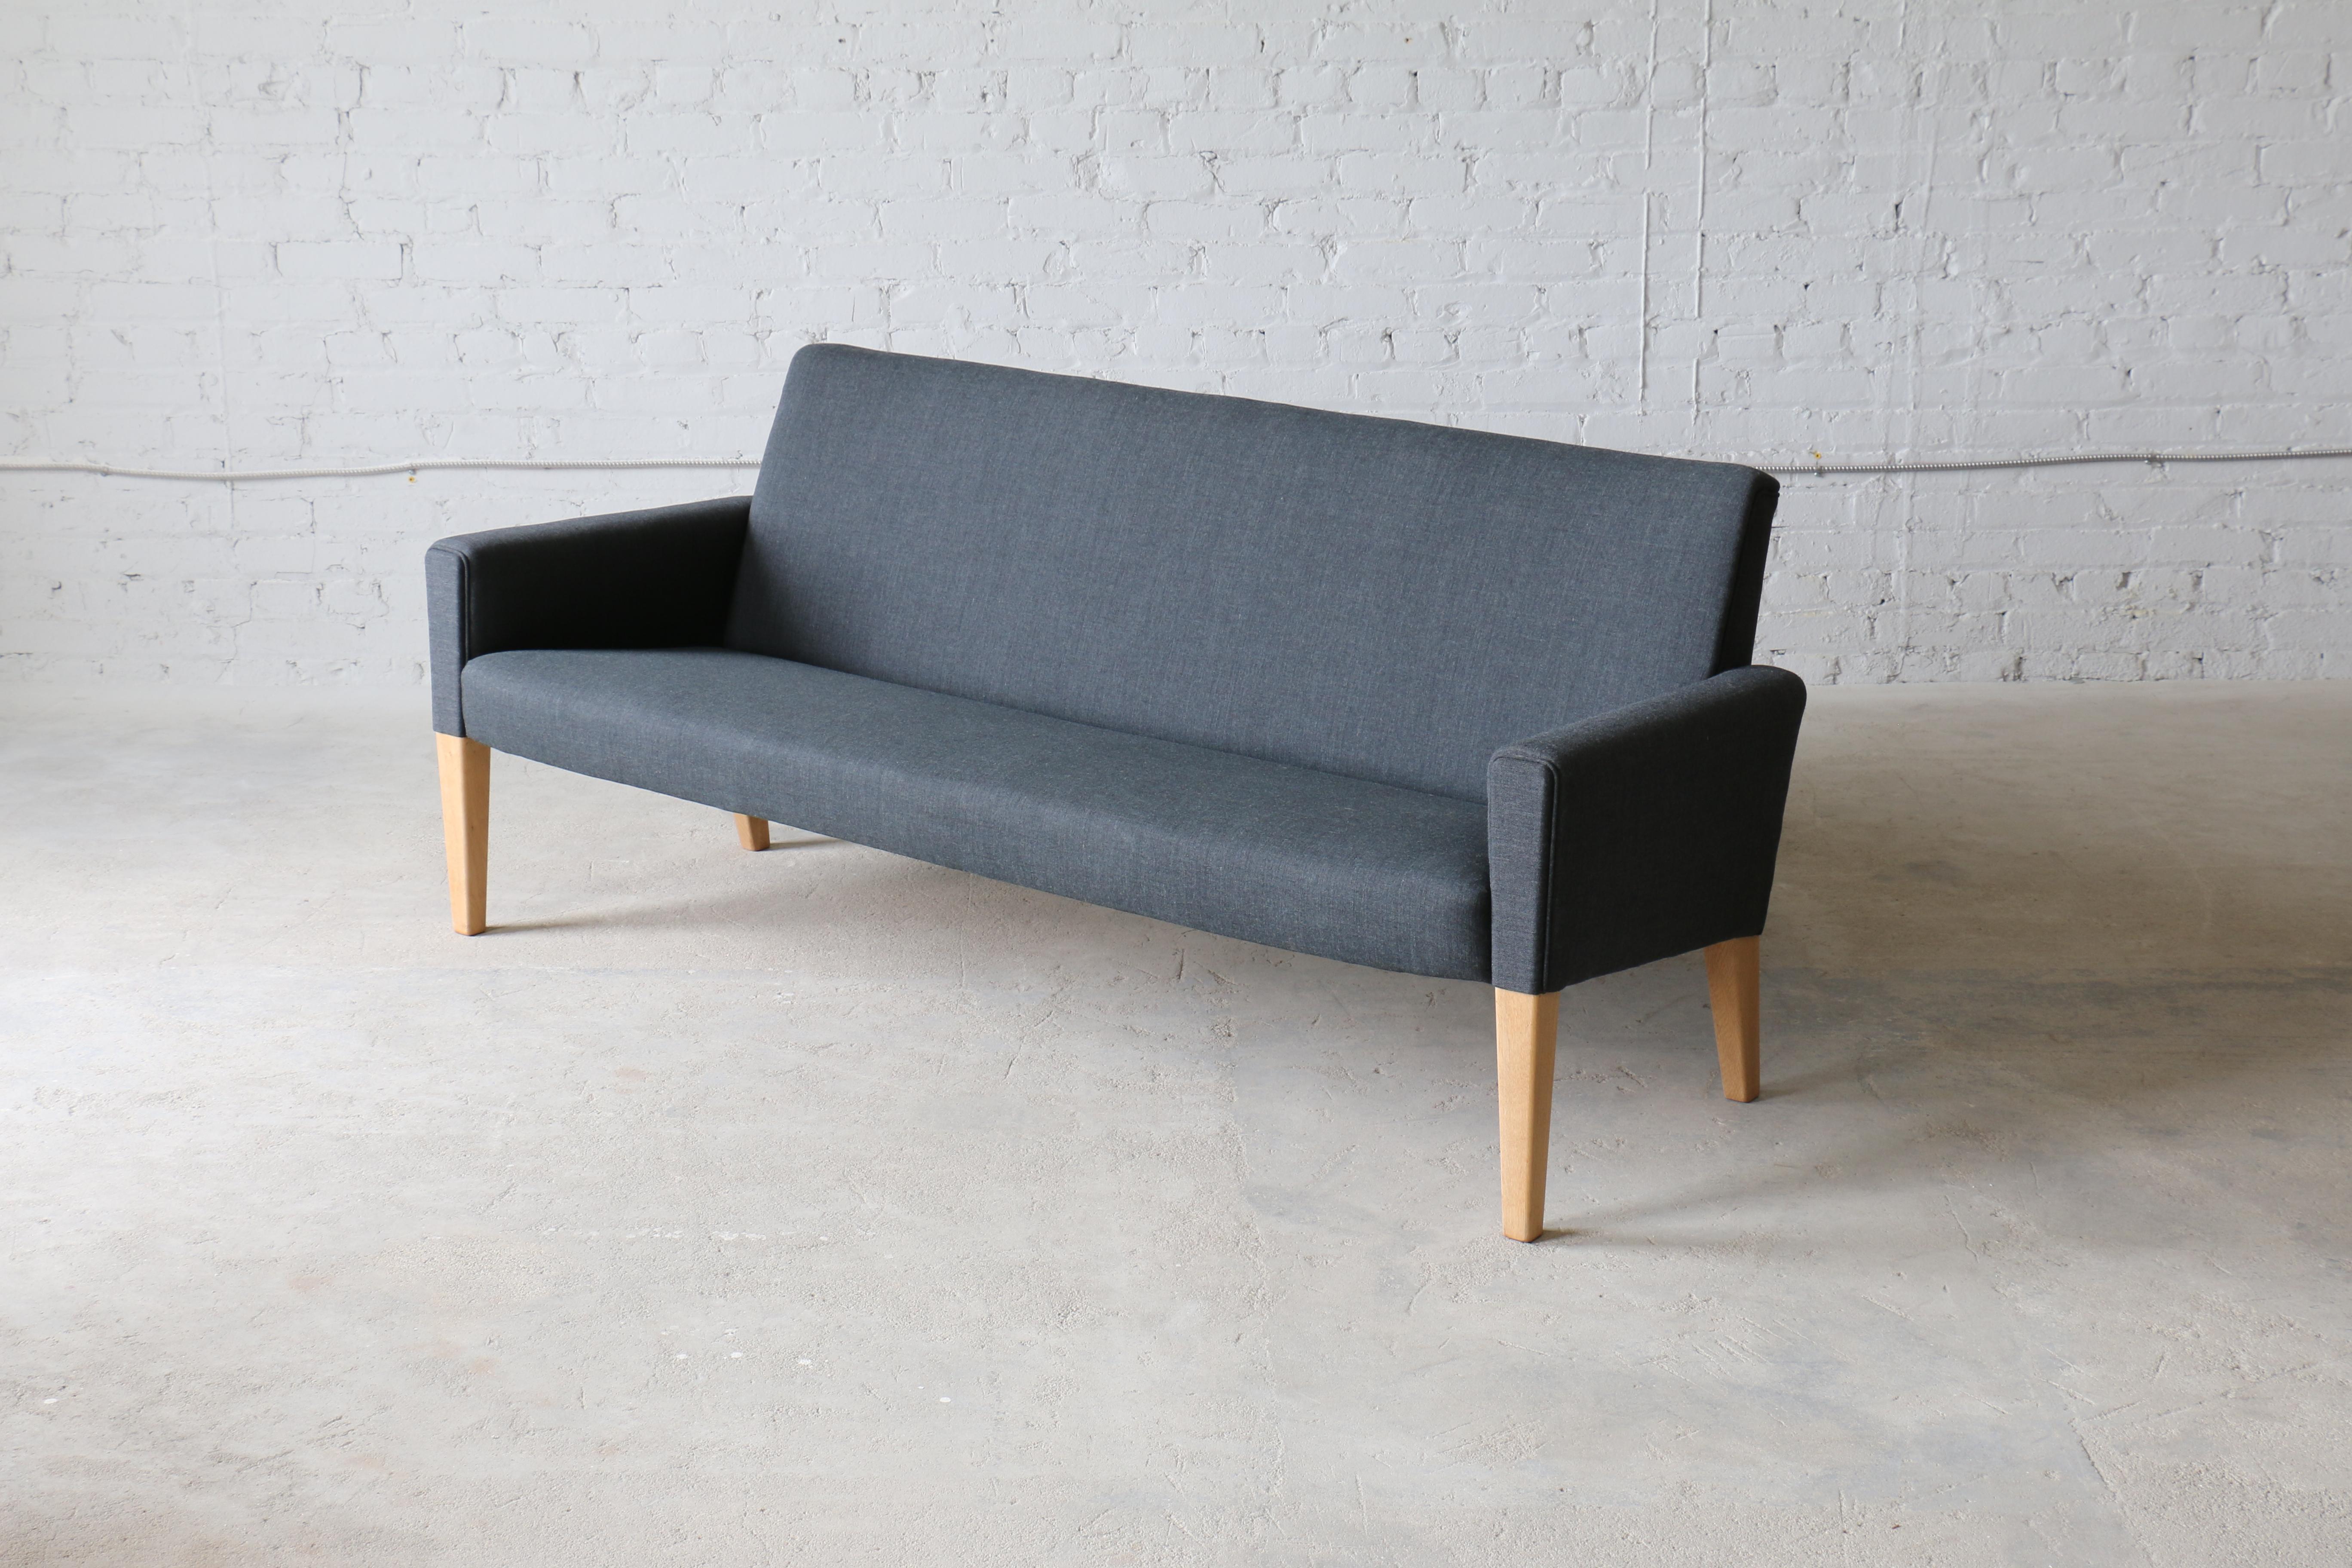 An oak sofa by Hans Wegner for AP Stolen. AP Stolen manufactured most of Wegner's fully upholstered pieces of cabinet maker quality such as his famous Papa Bear chair. This is one of Wegner's more uncommon designs. It is a very sophisticated and